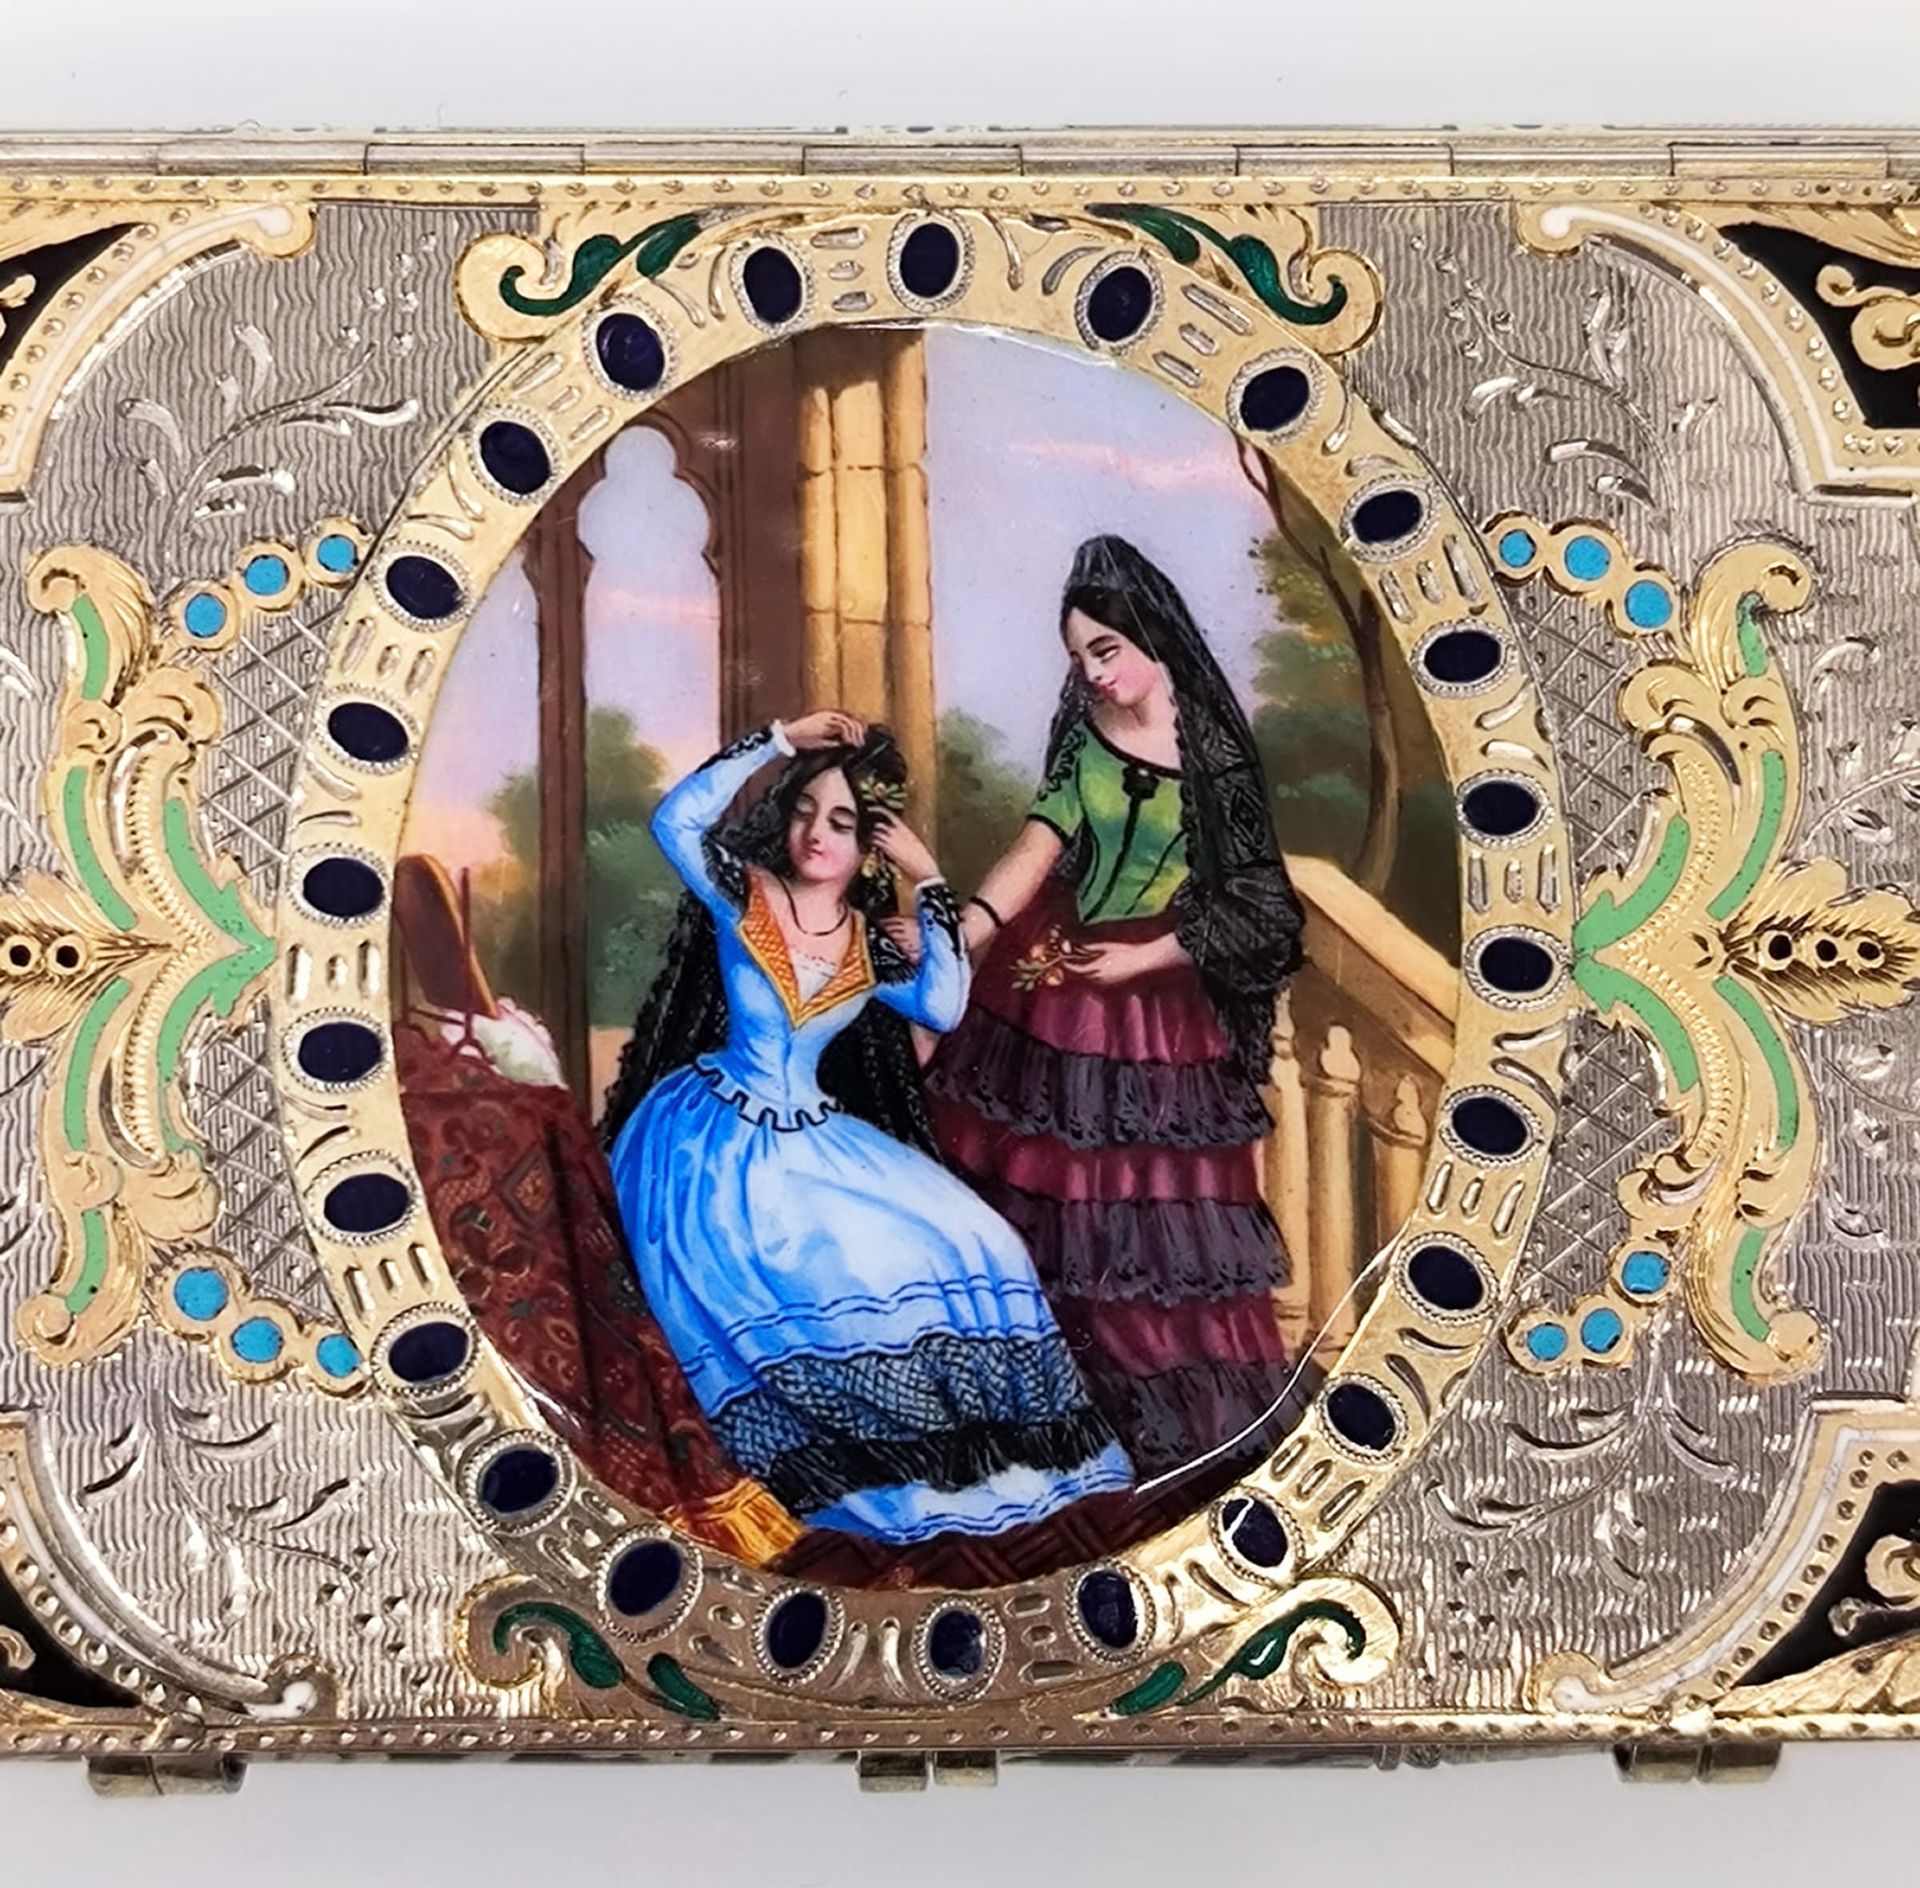 Etui Voyage in silver with a double-sided gallant scene and gold guilloché enamel, 19th century - Image 5 of 7